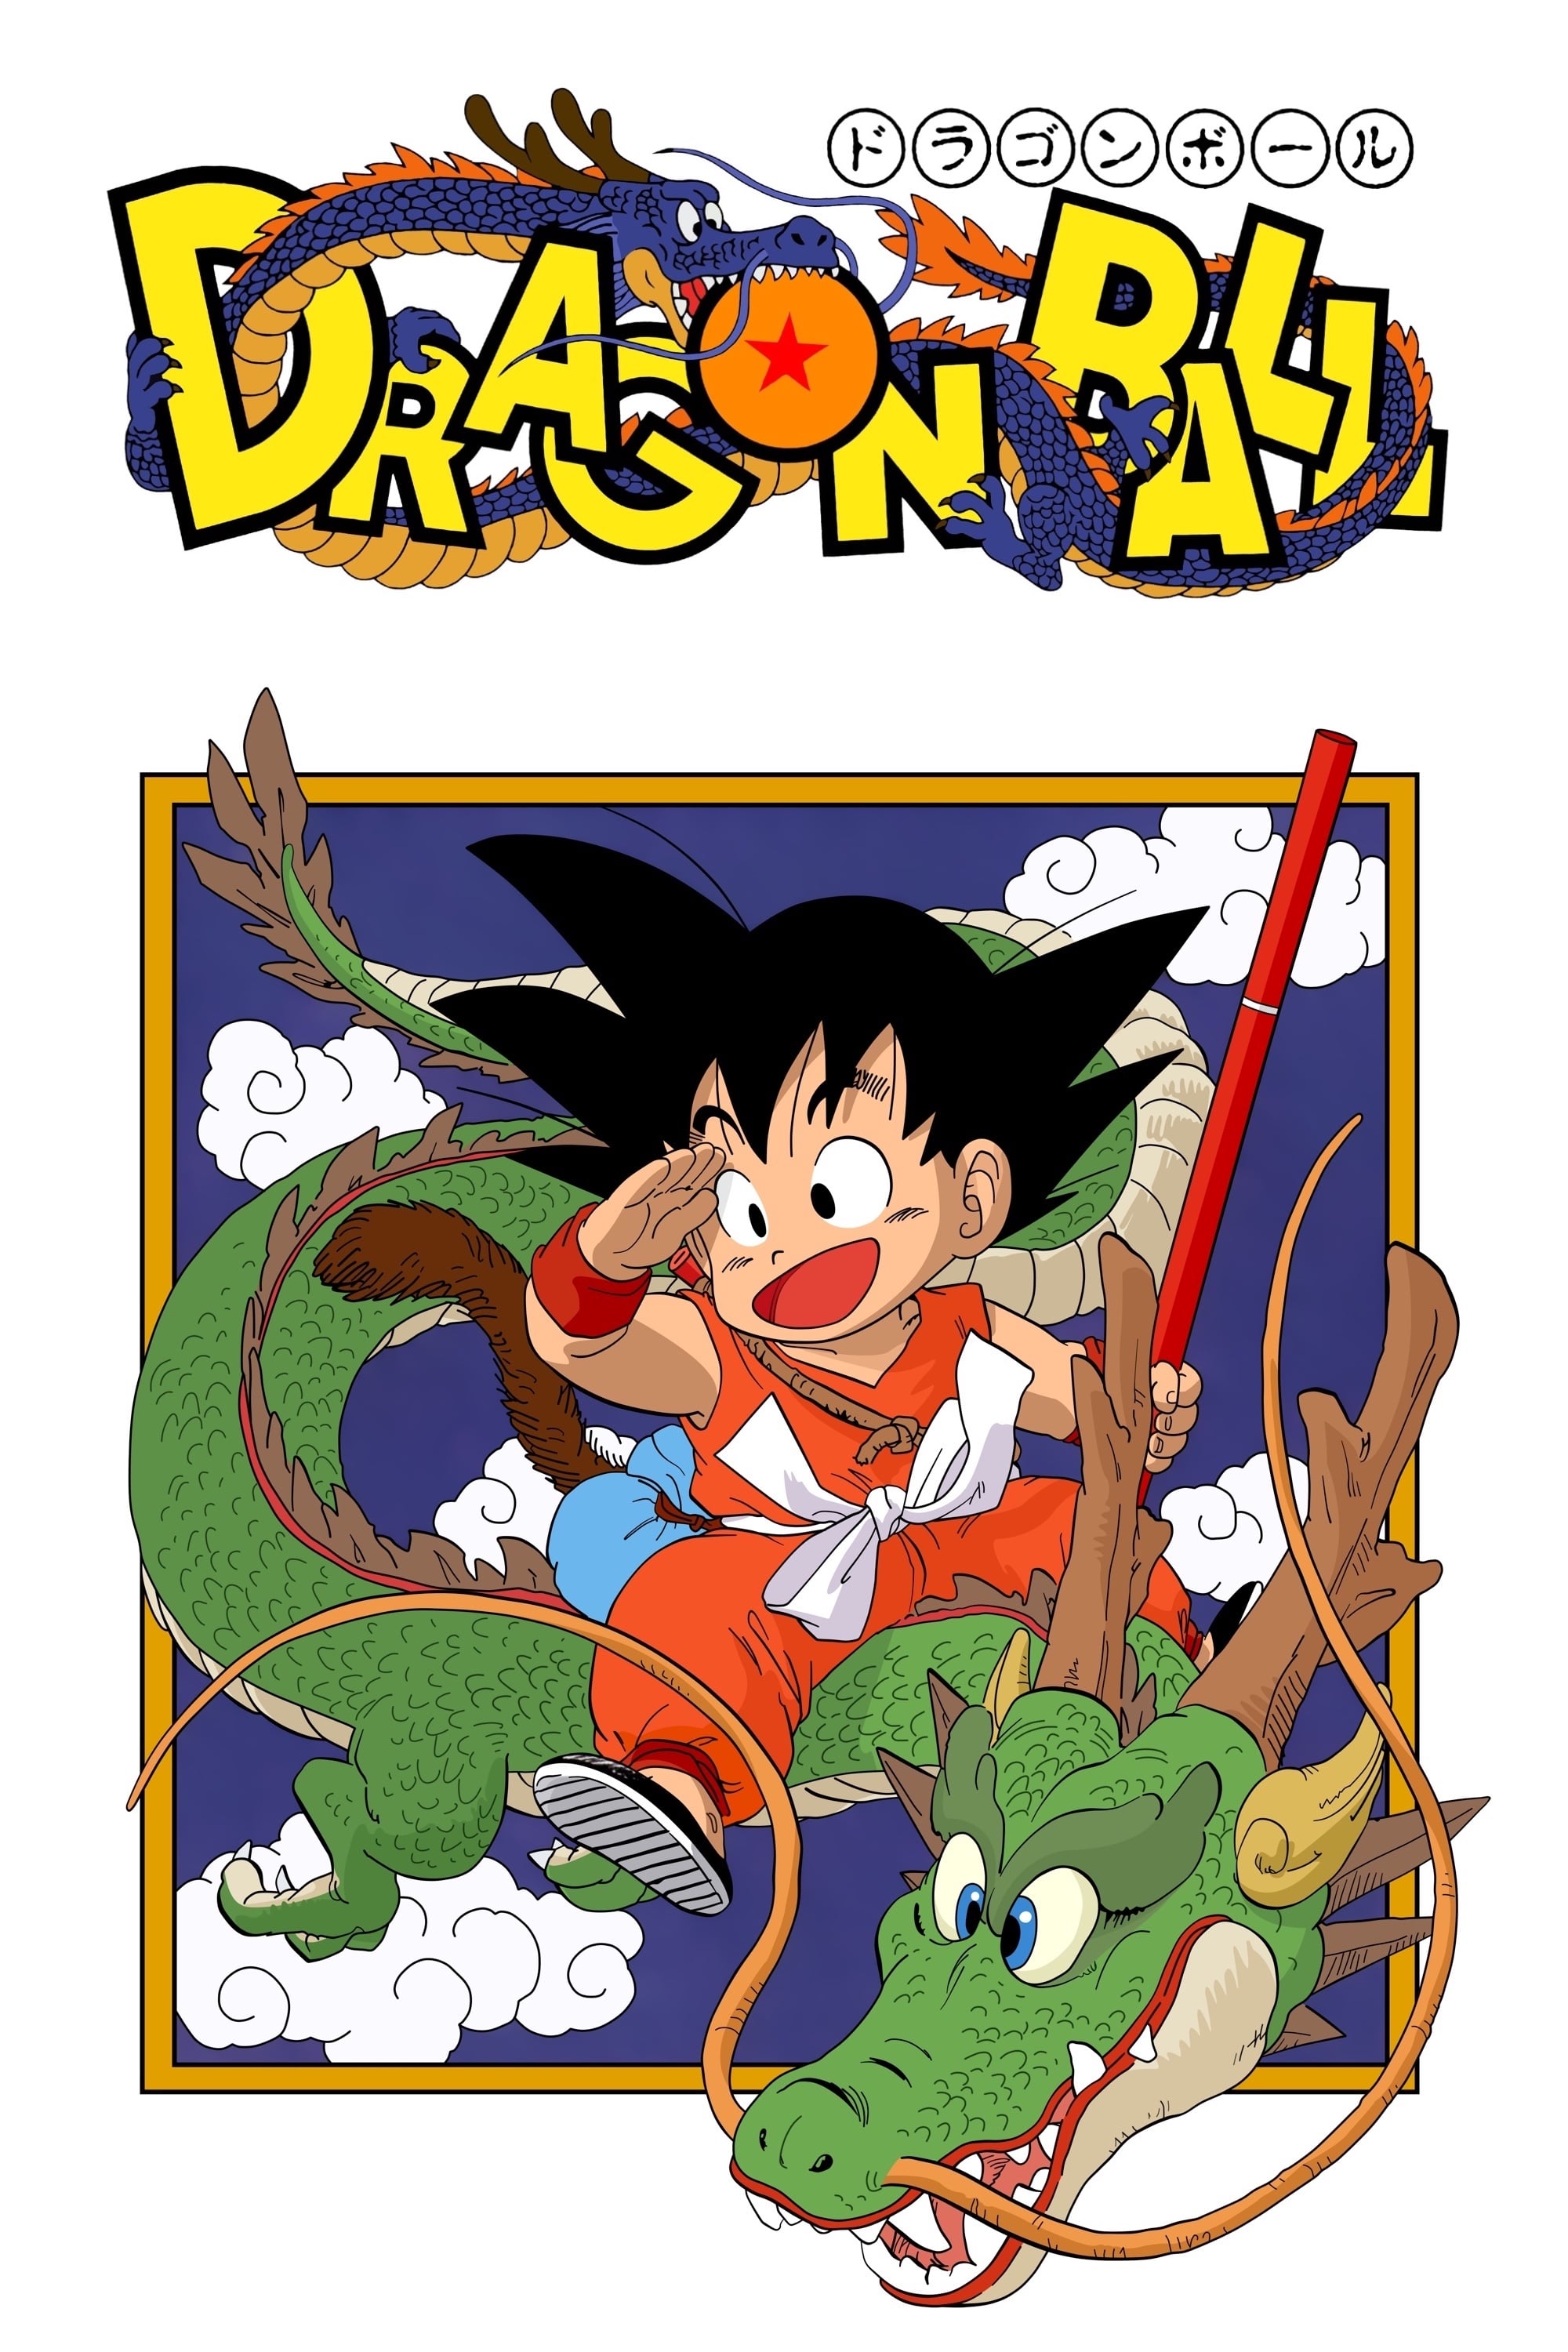 Dragon Ball (TV Series 1986-1989) - Posters — The Movie ...